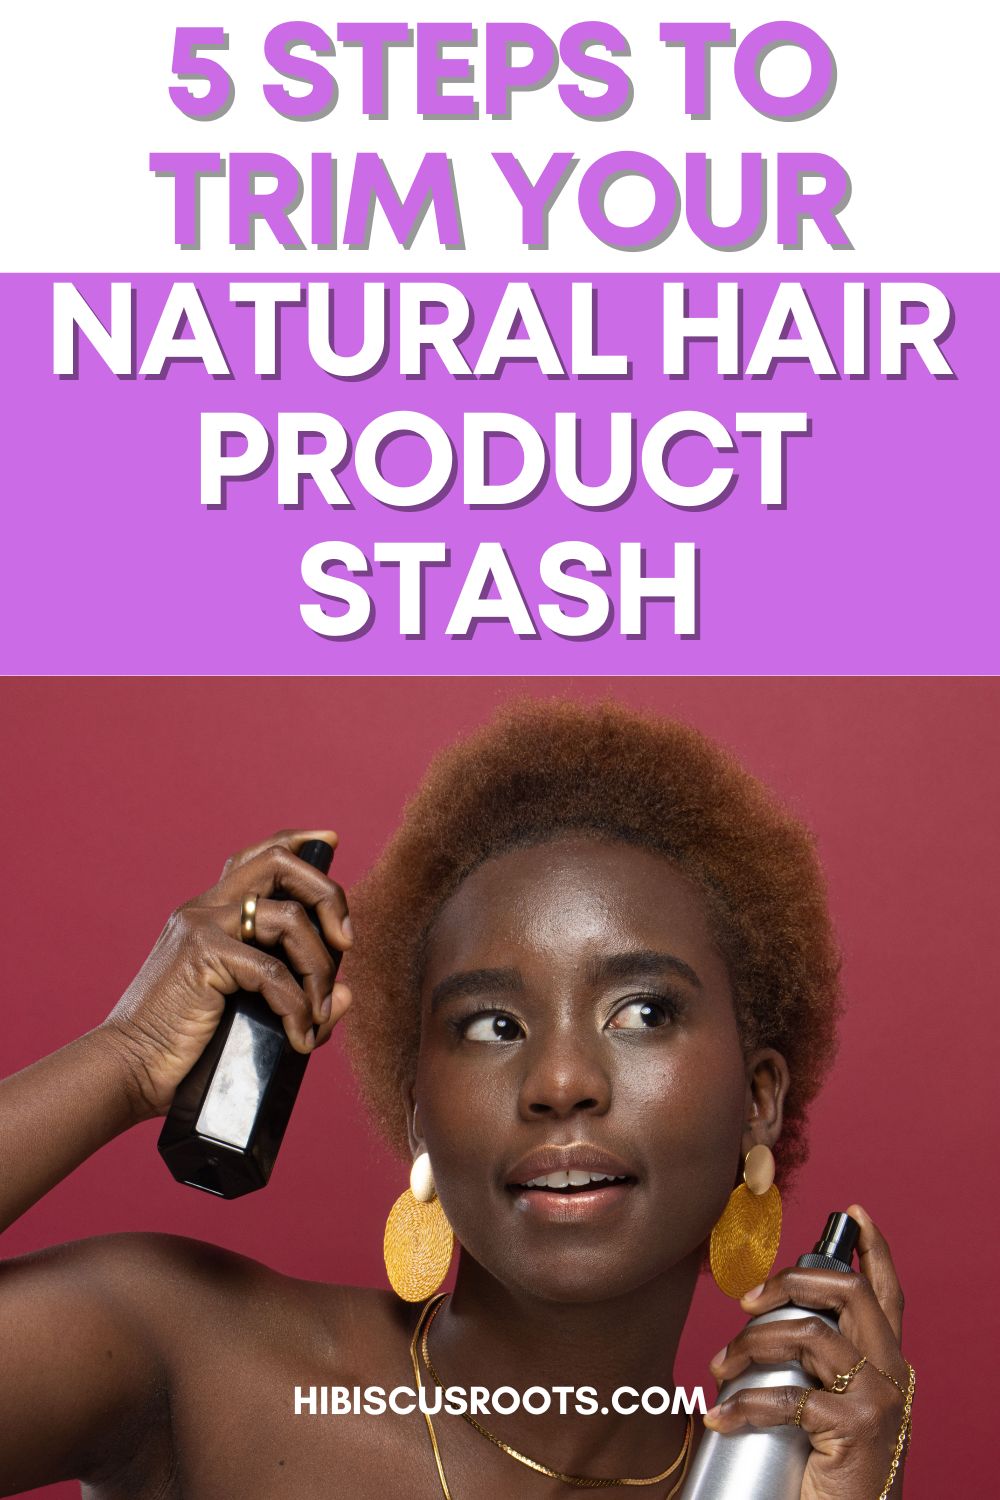 5 Steps To Slim Your Natural Hair Product Stash